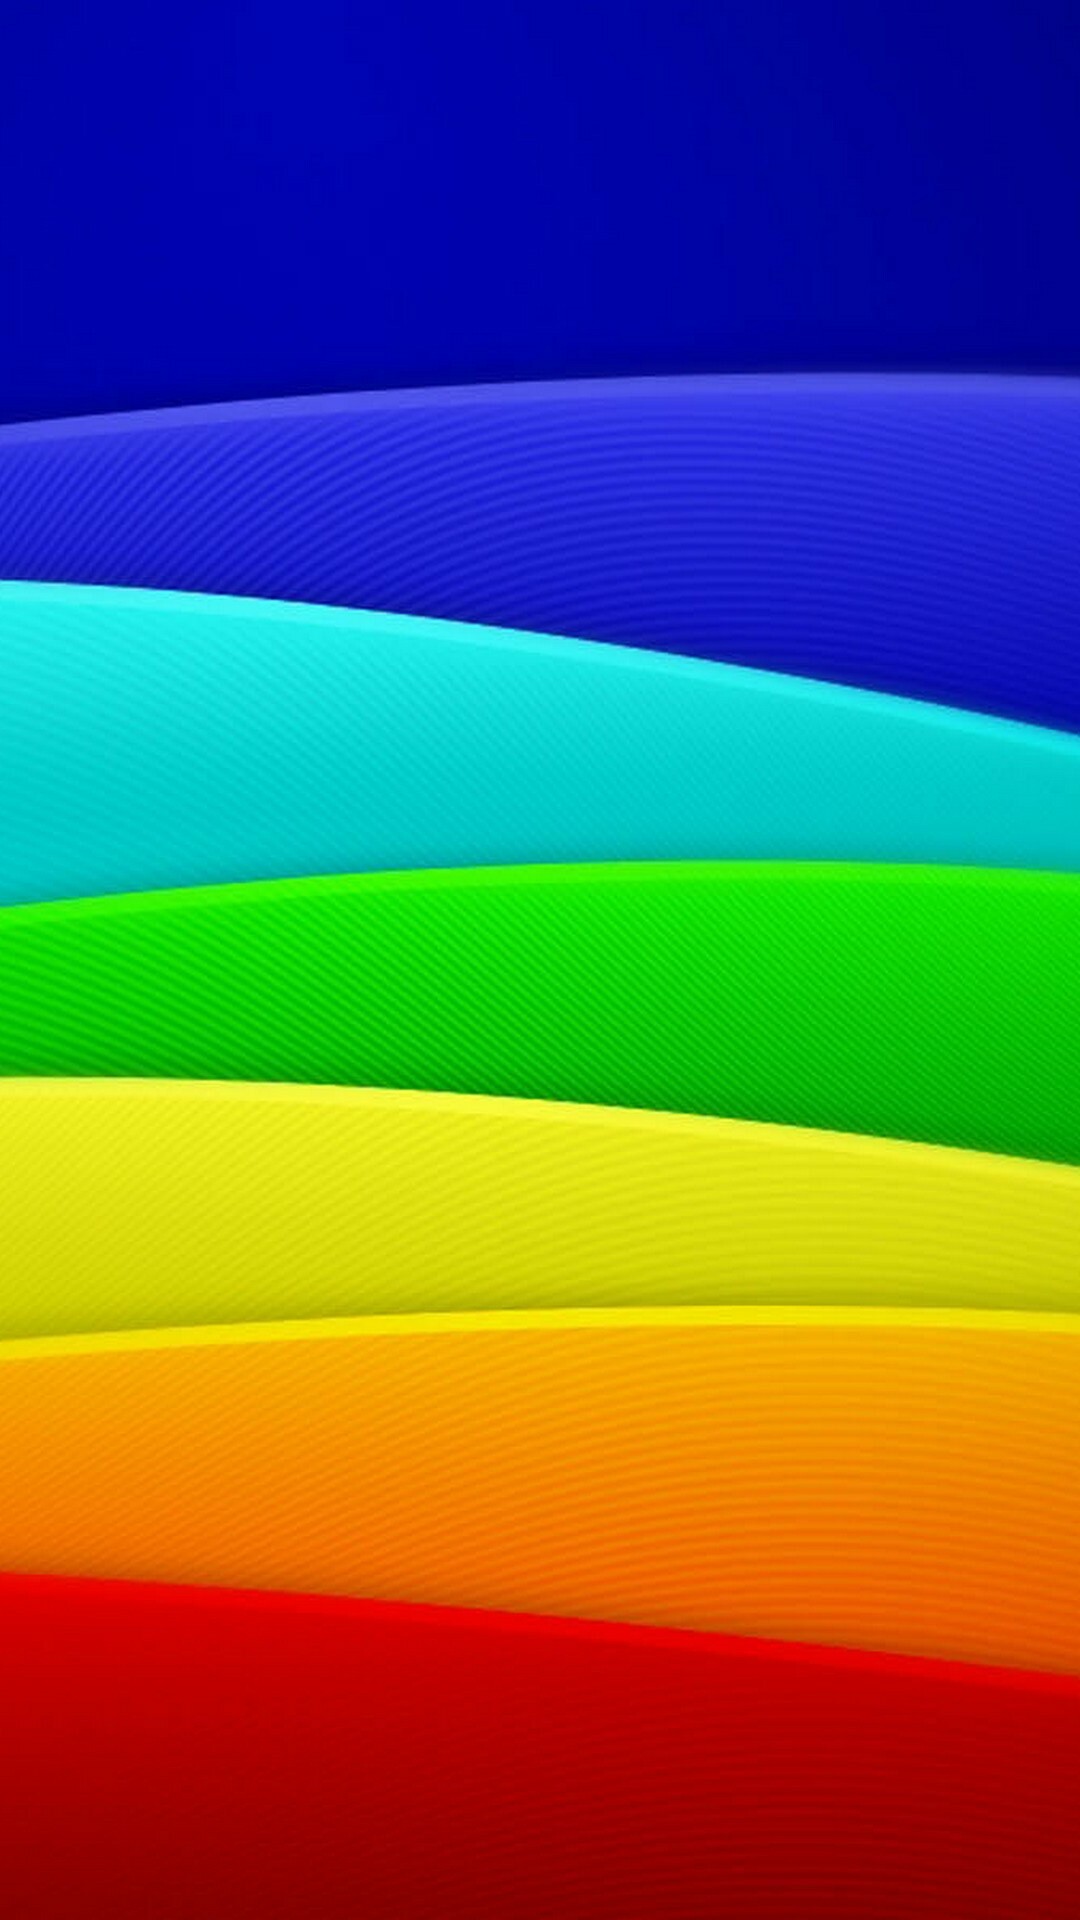 Rainbow Colors: Asymmetry, Two-dimensional space, Multitone forms. 1080x1920 Full HD Wallpaper.